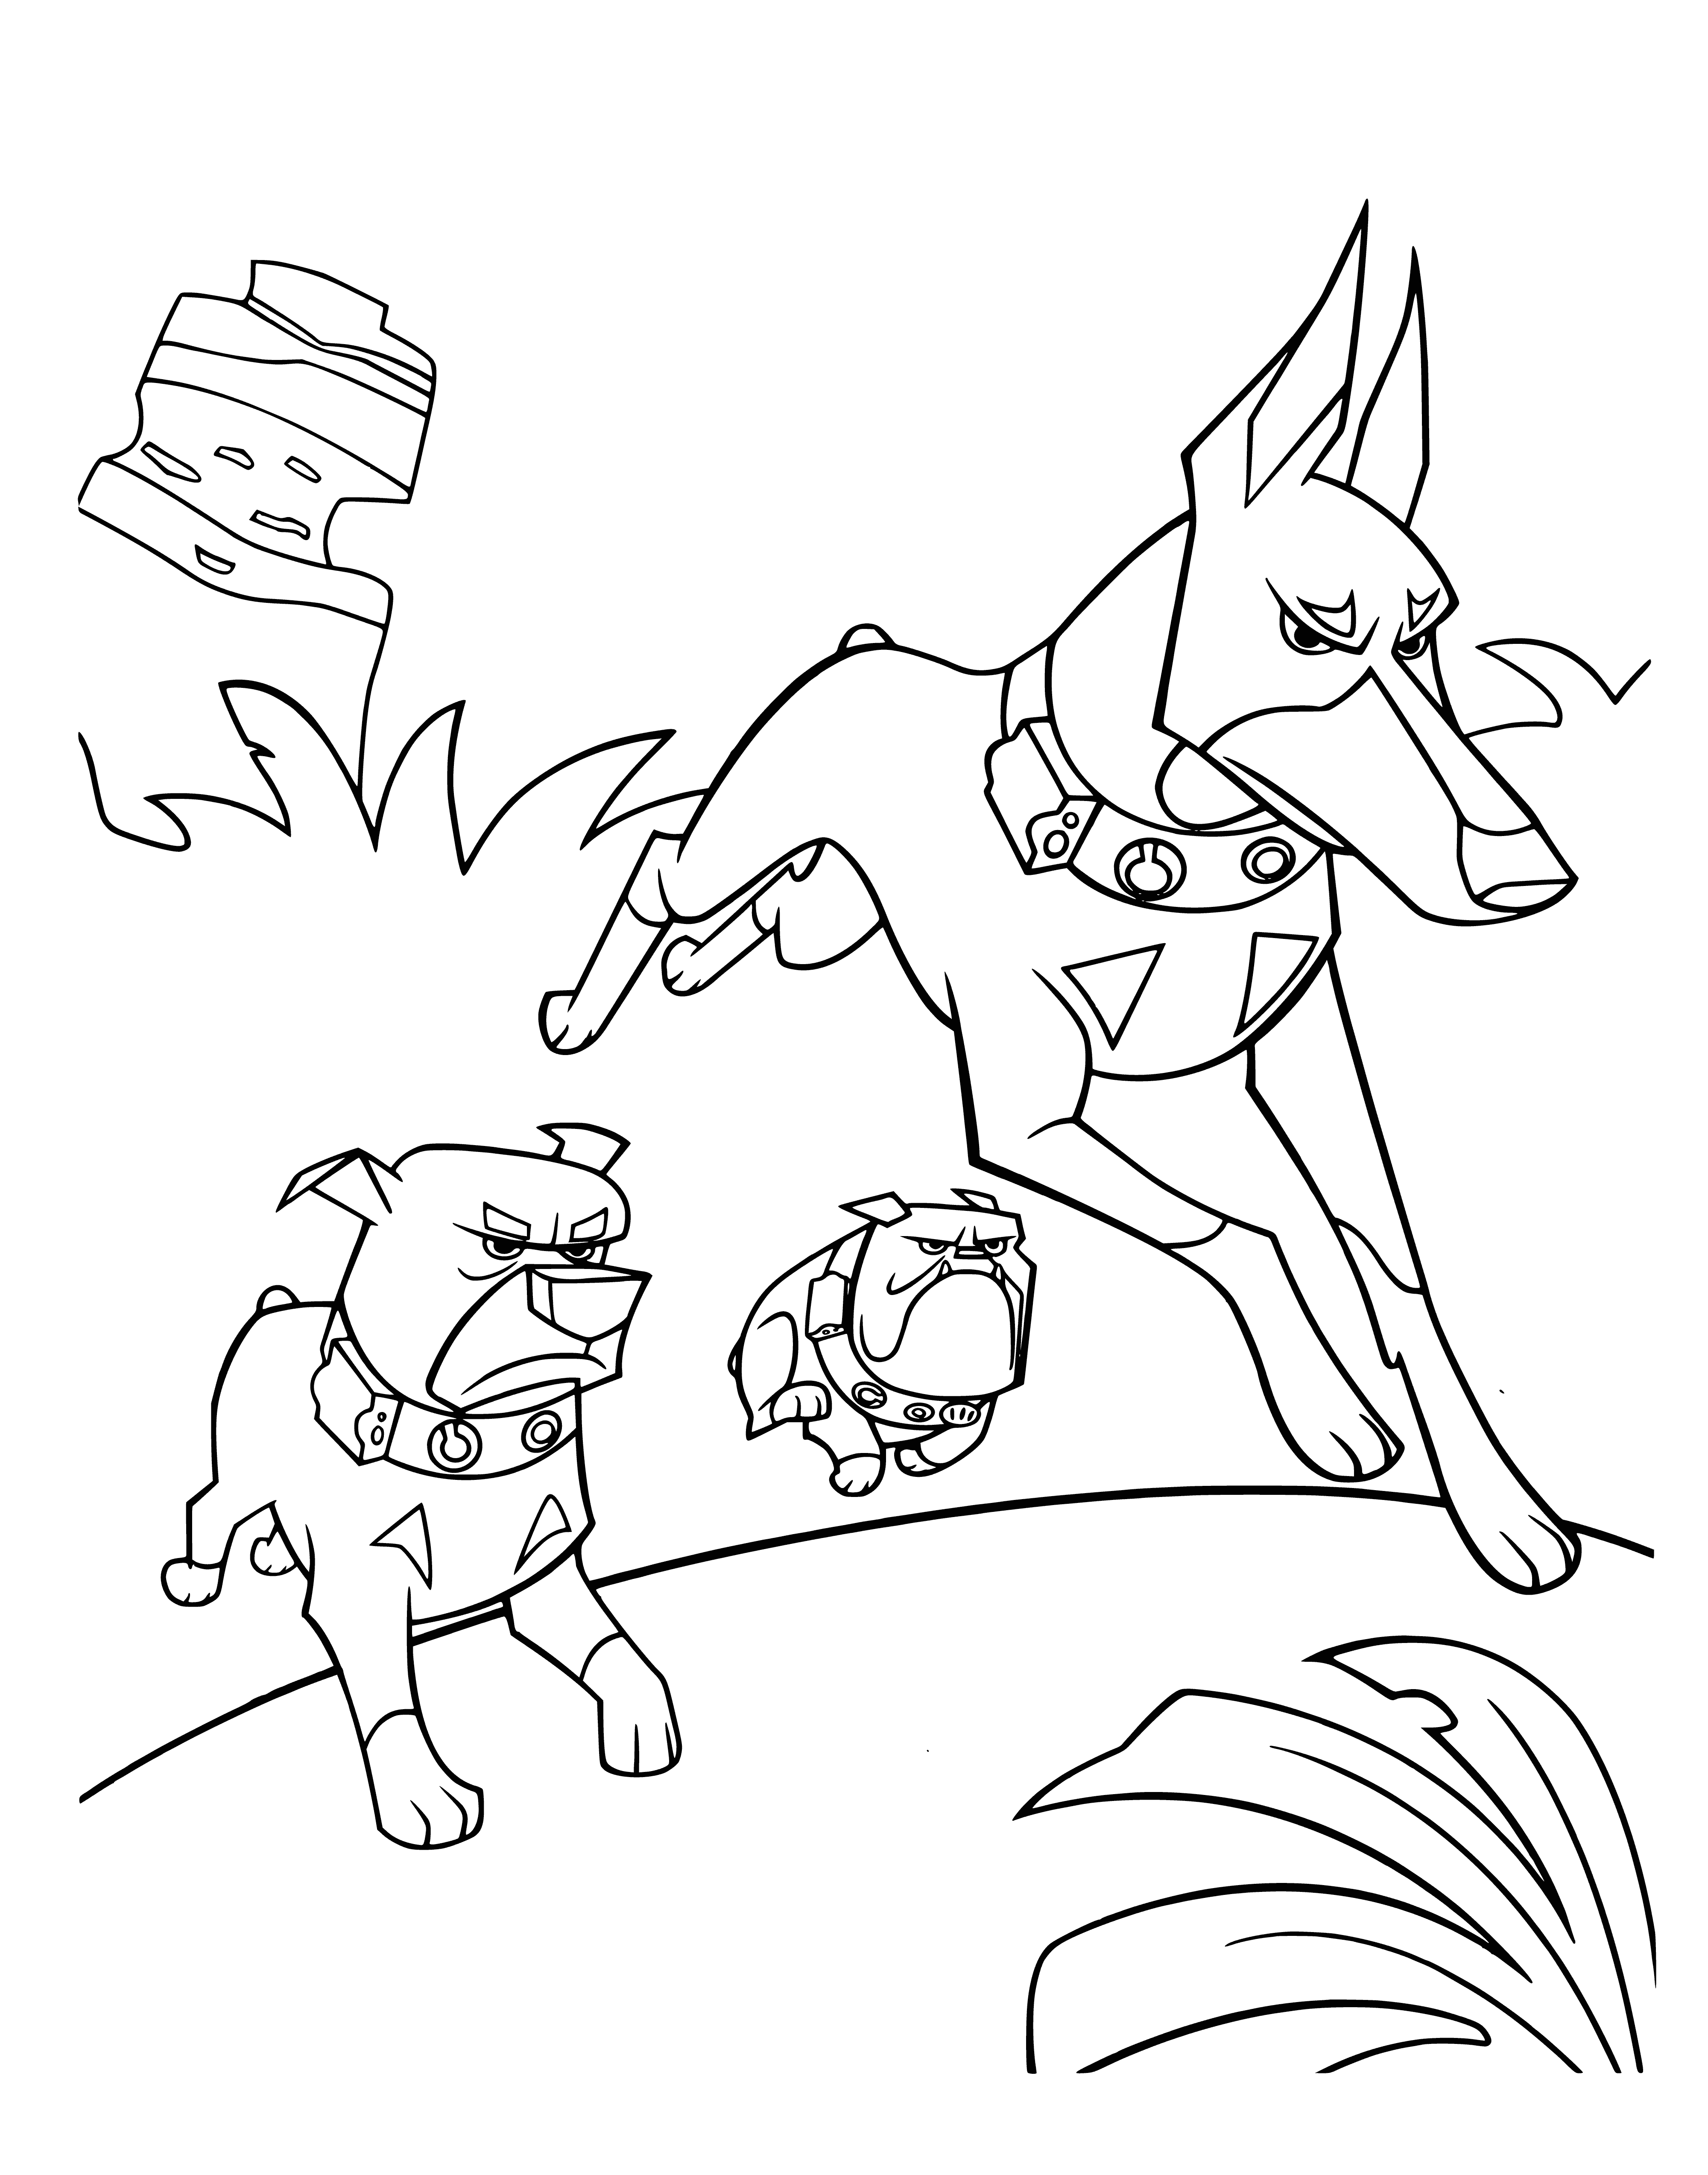 Three dogs coloring page